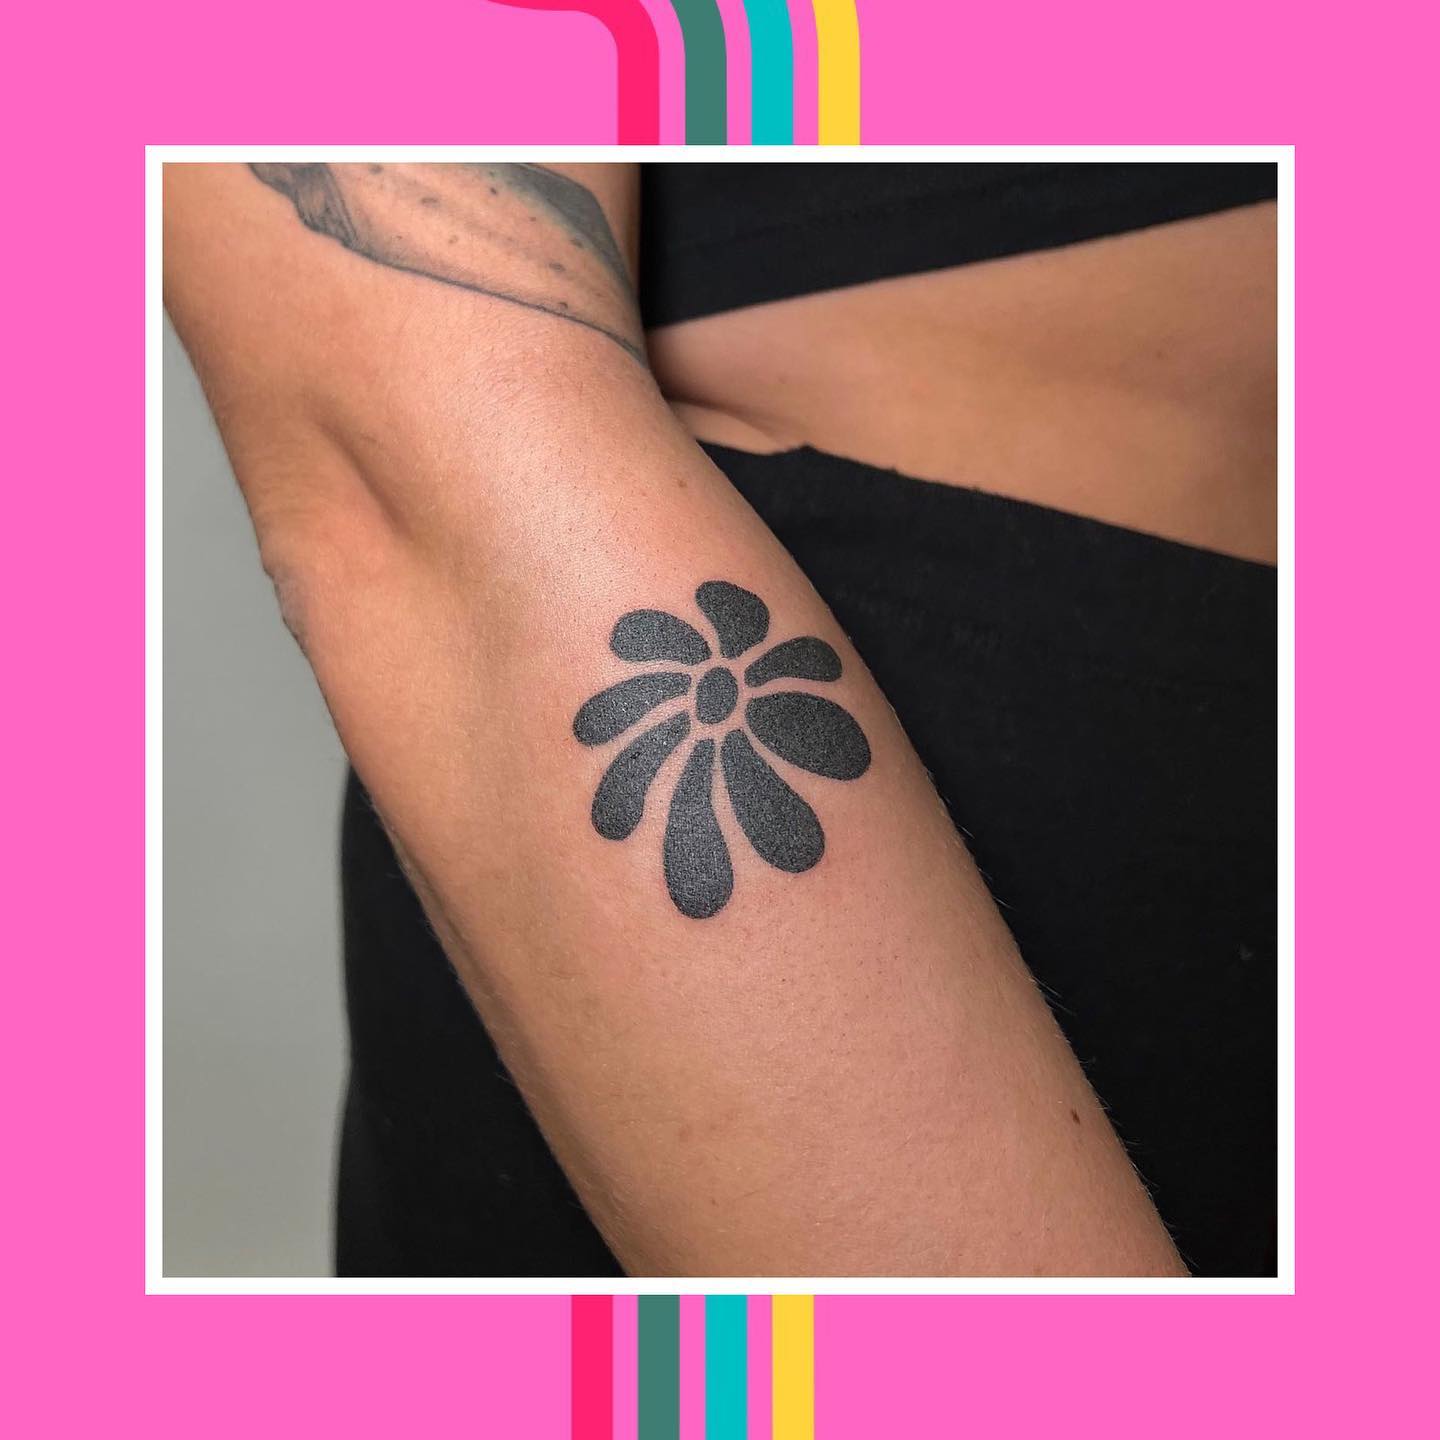 Tattoo by @charlie.labz Link in bio to book. 🥰